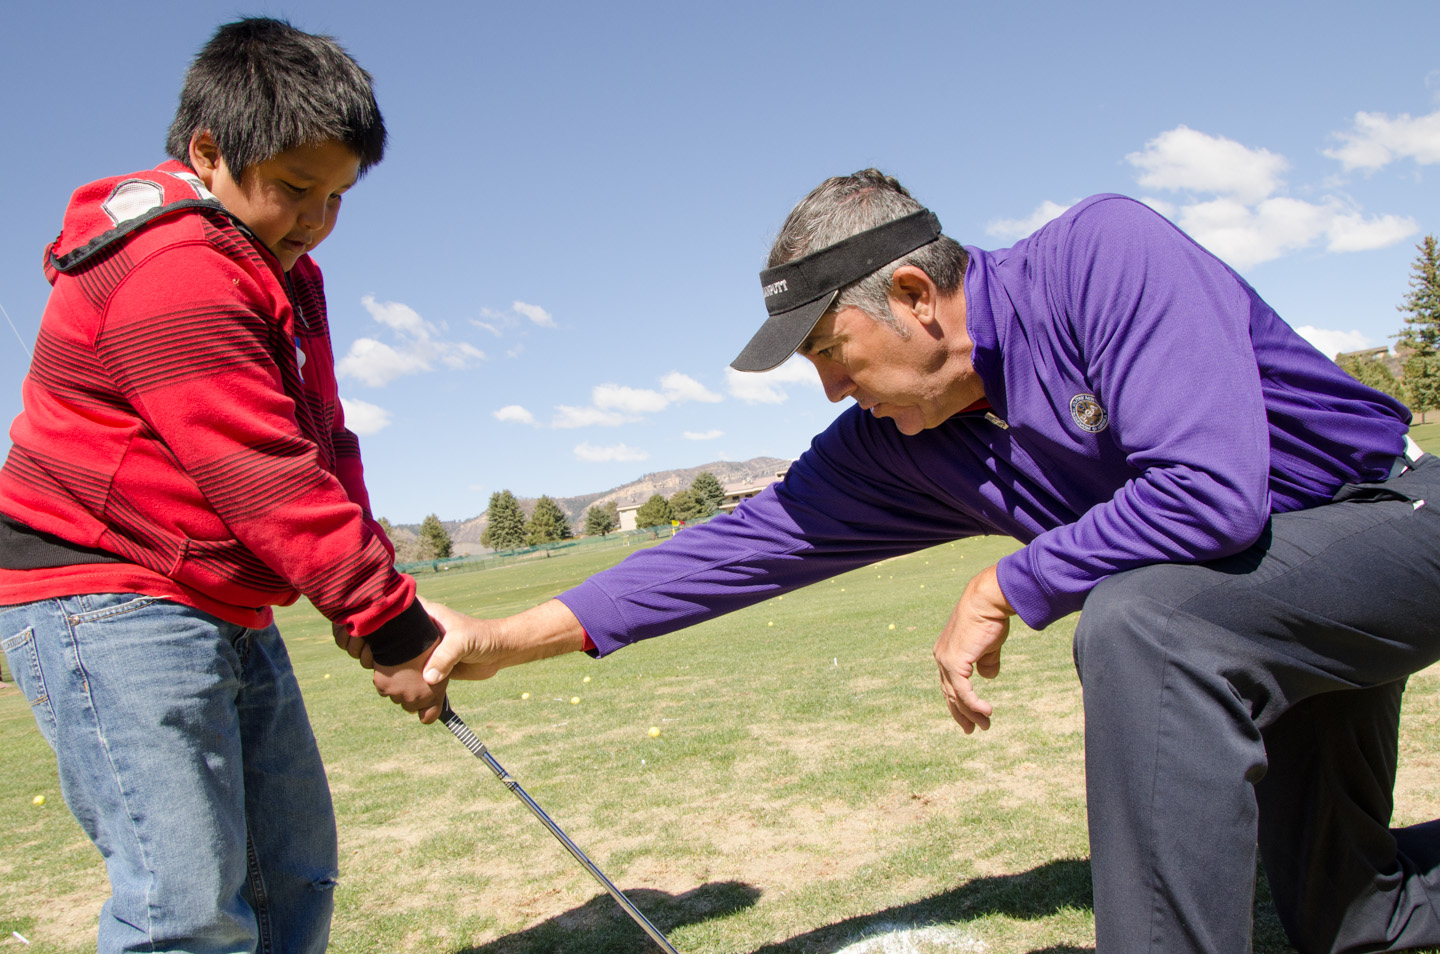 The Boys & Girls Club of the Southern Ute Indian Tribe hosted a Spring Break Golf Clinic